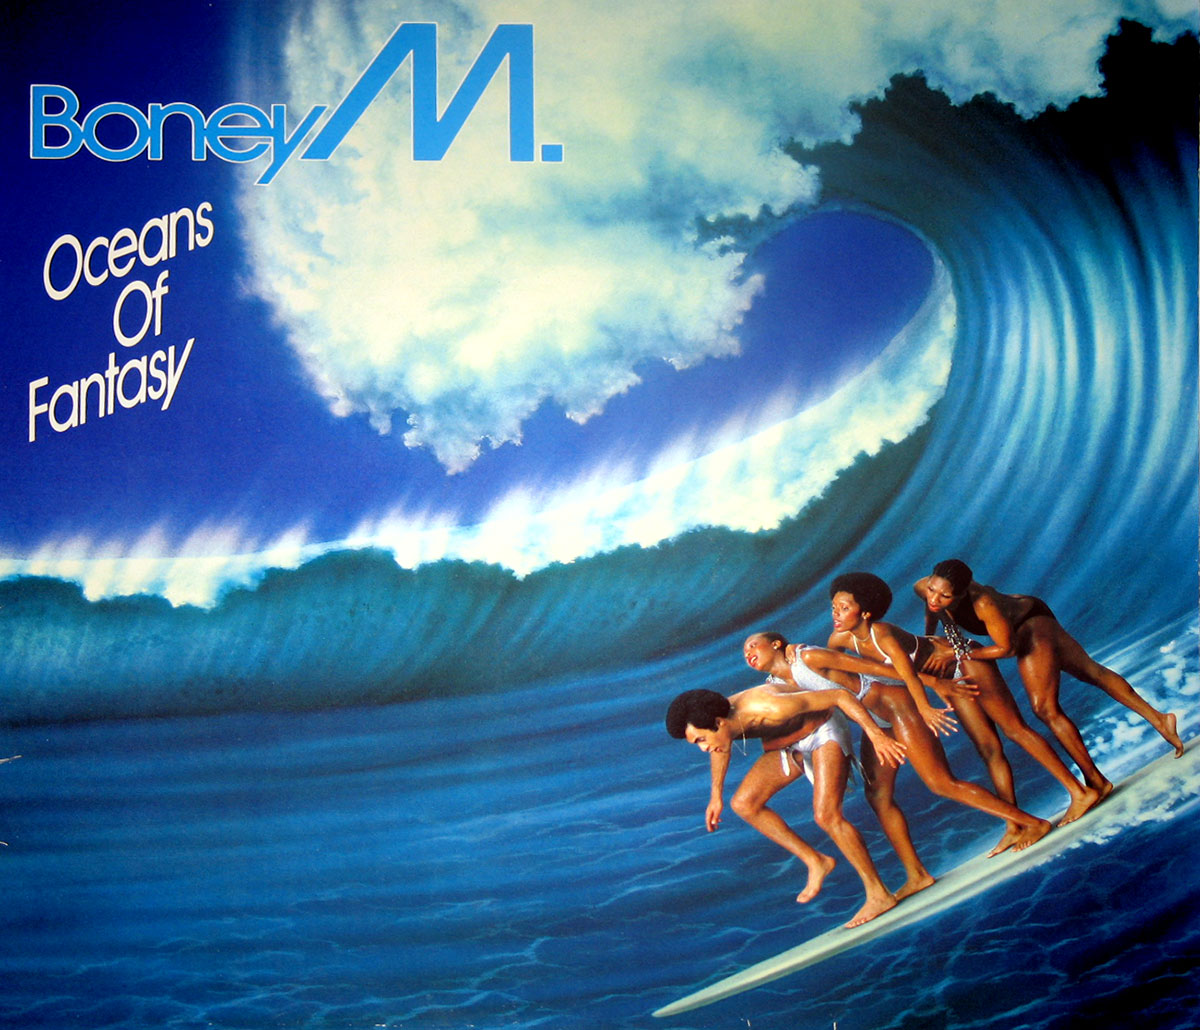 This Carrere release of Boney M's Oceans of Fantasy has a gimmick gatefold folder, when opened it unfolds a 24" x 24" poster, see photo below 